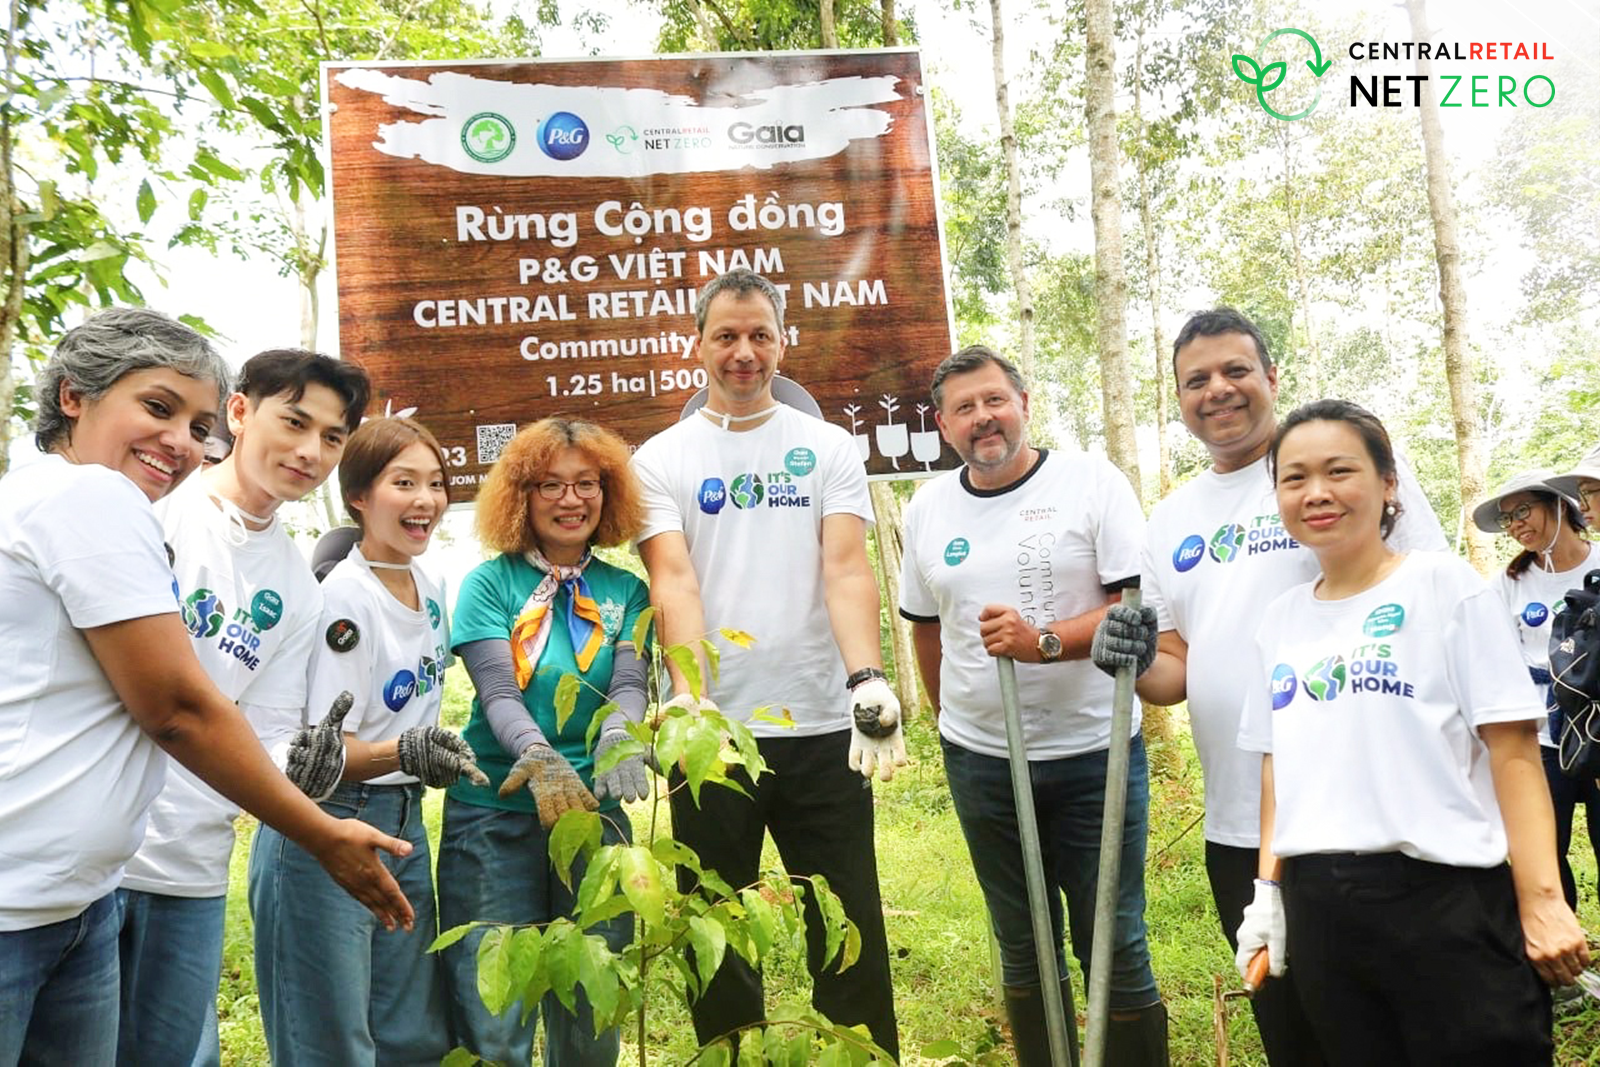 P&G Vietnam and Central Retail Vietnam Keeping The “Forests For Good” Initiative Going On With The Reforestation Volunteering Day at Dong Nai Forest